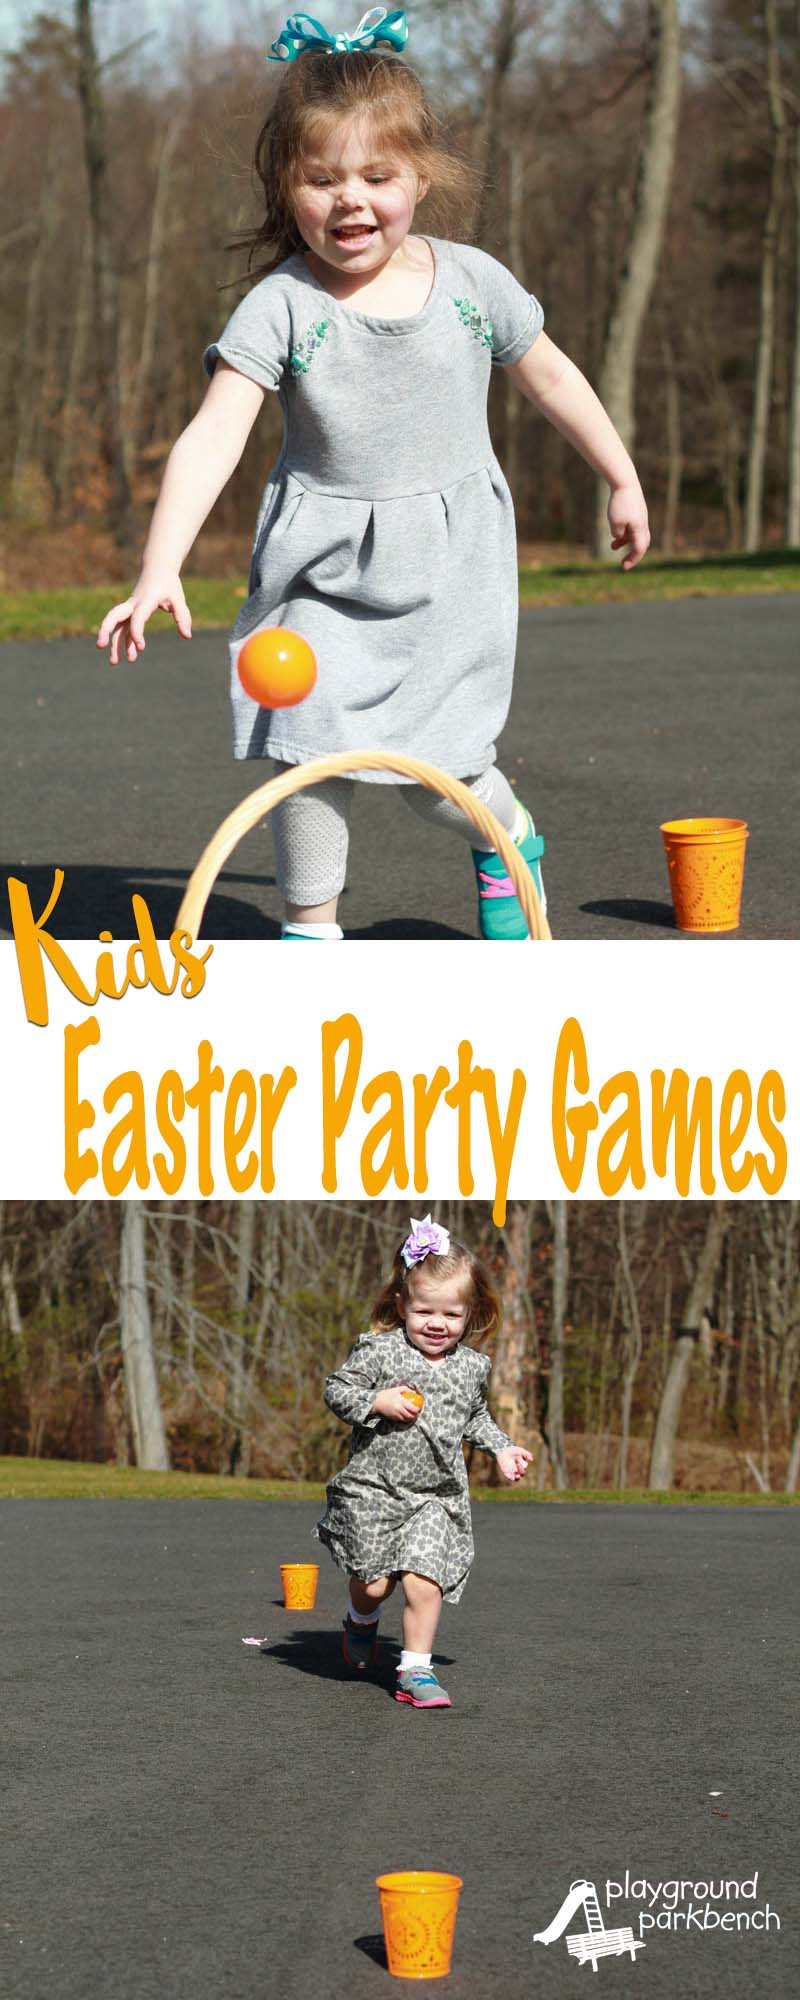 Kids Easter Party Game Ideas
 Kids Easter Party Games